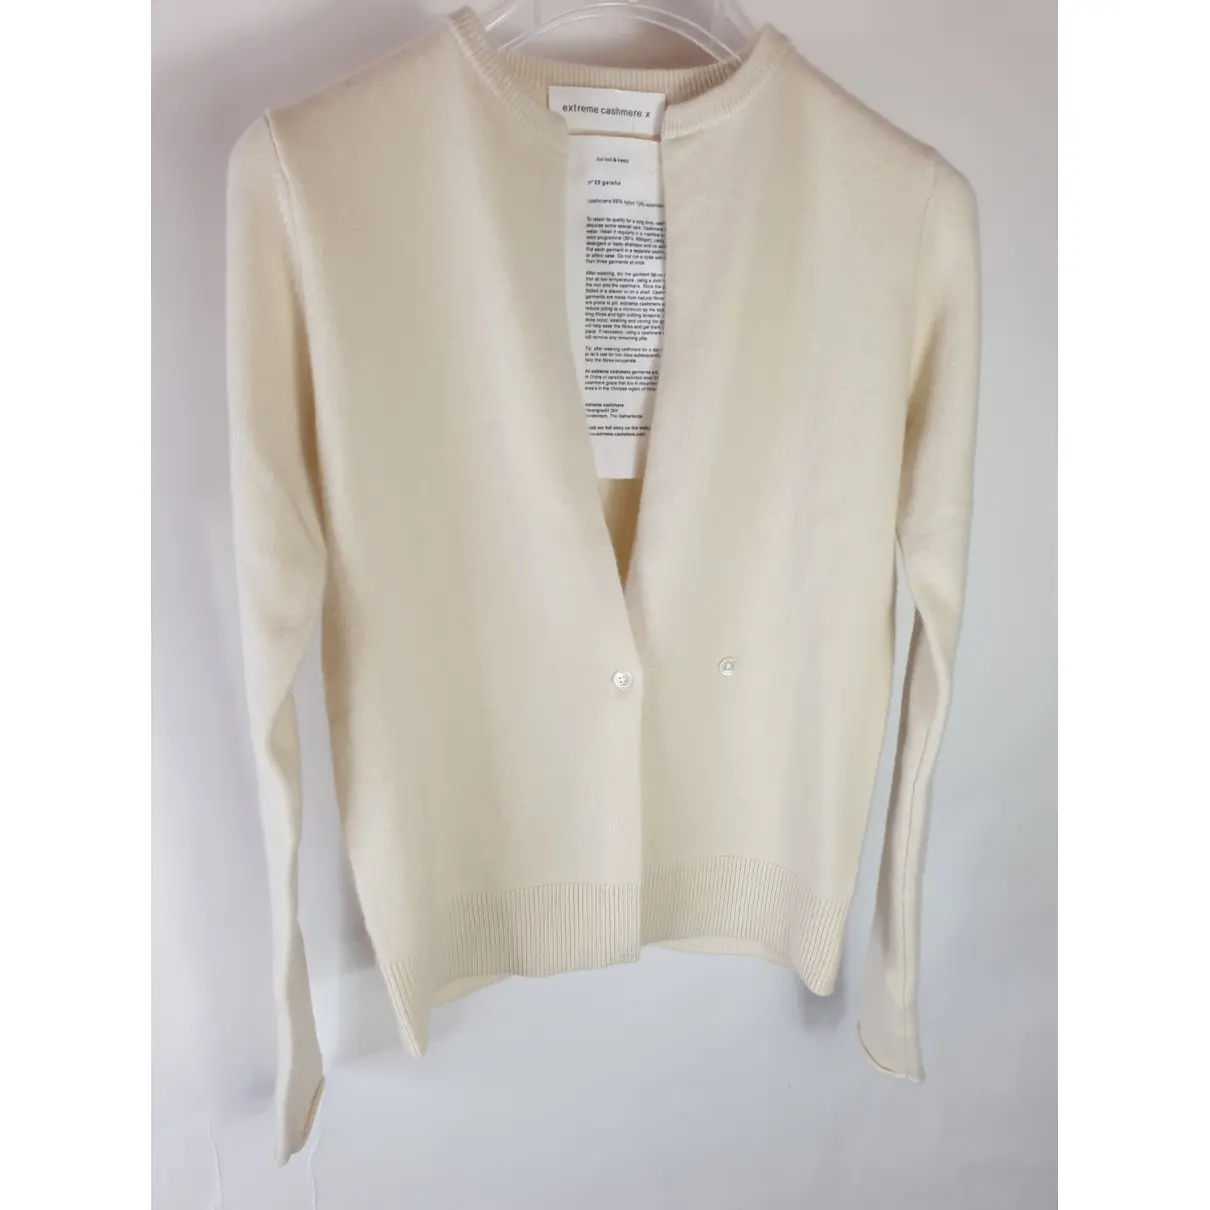 Buy Extreme Cashmere Cashmere cardigan online